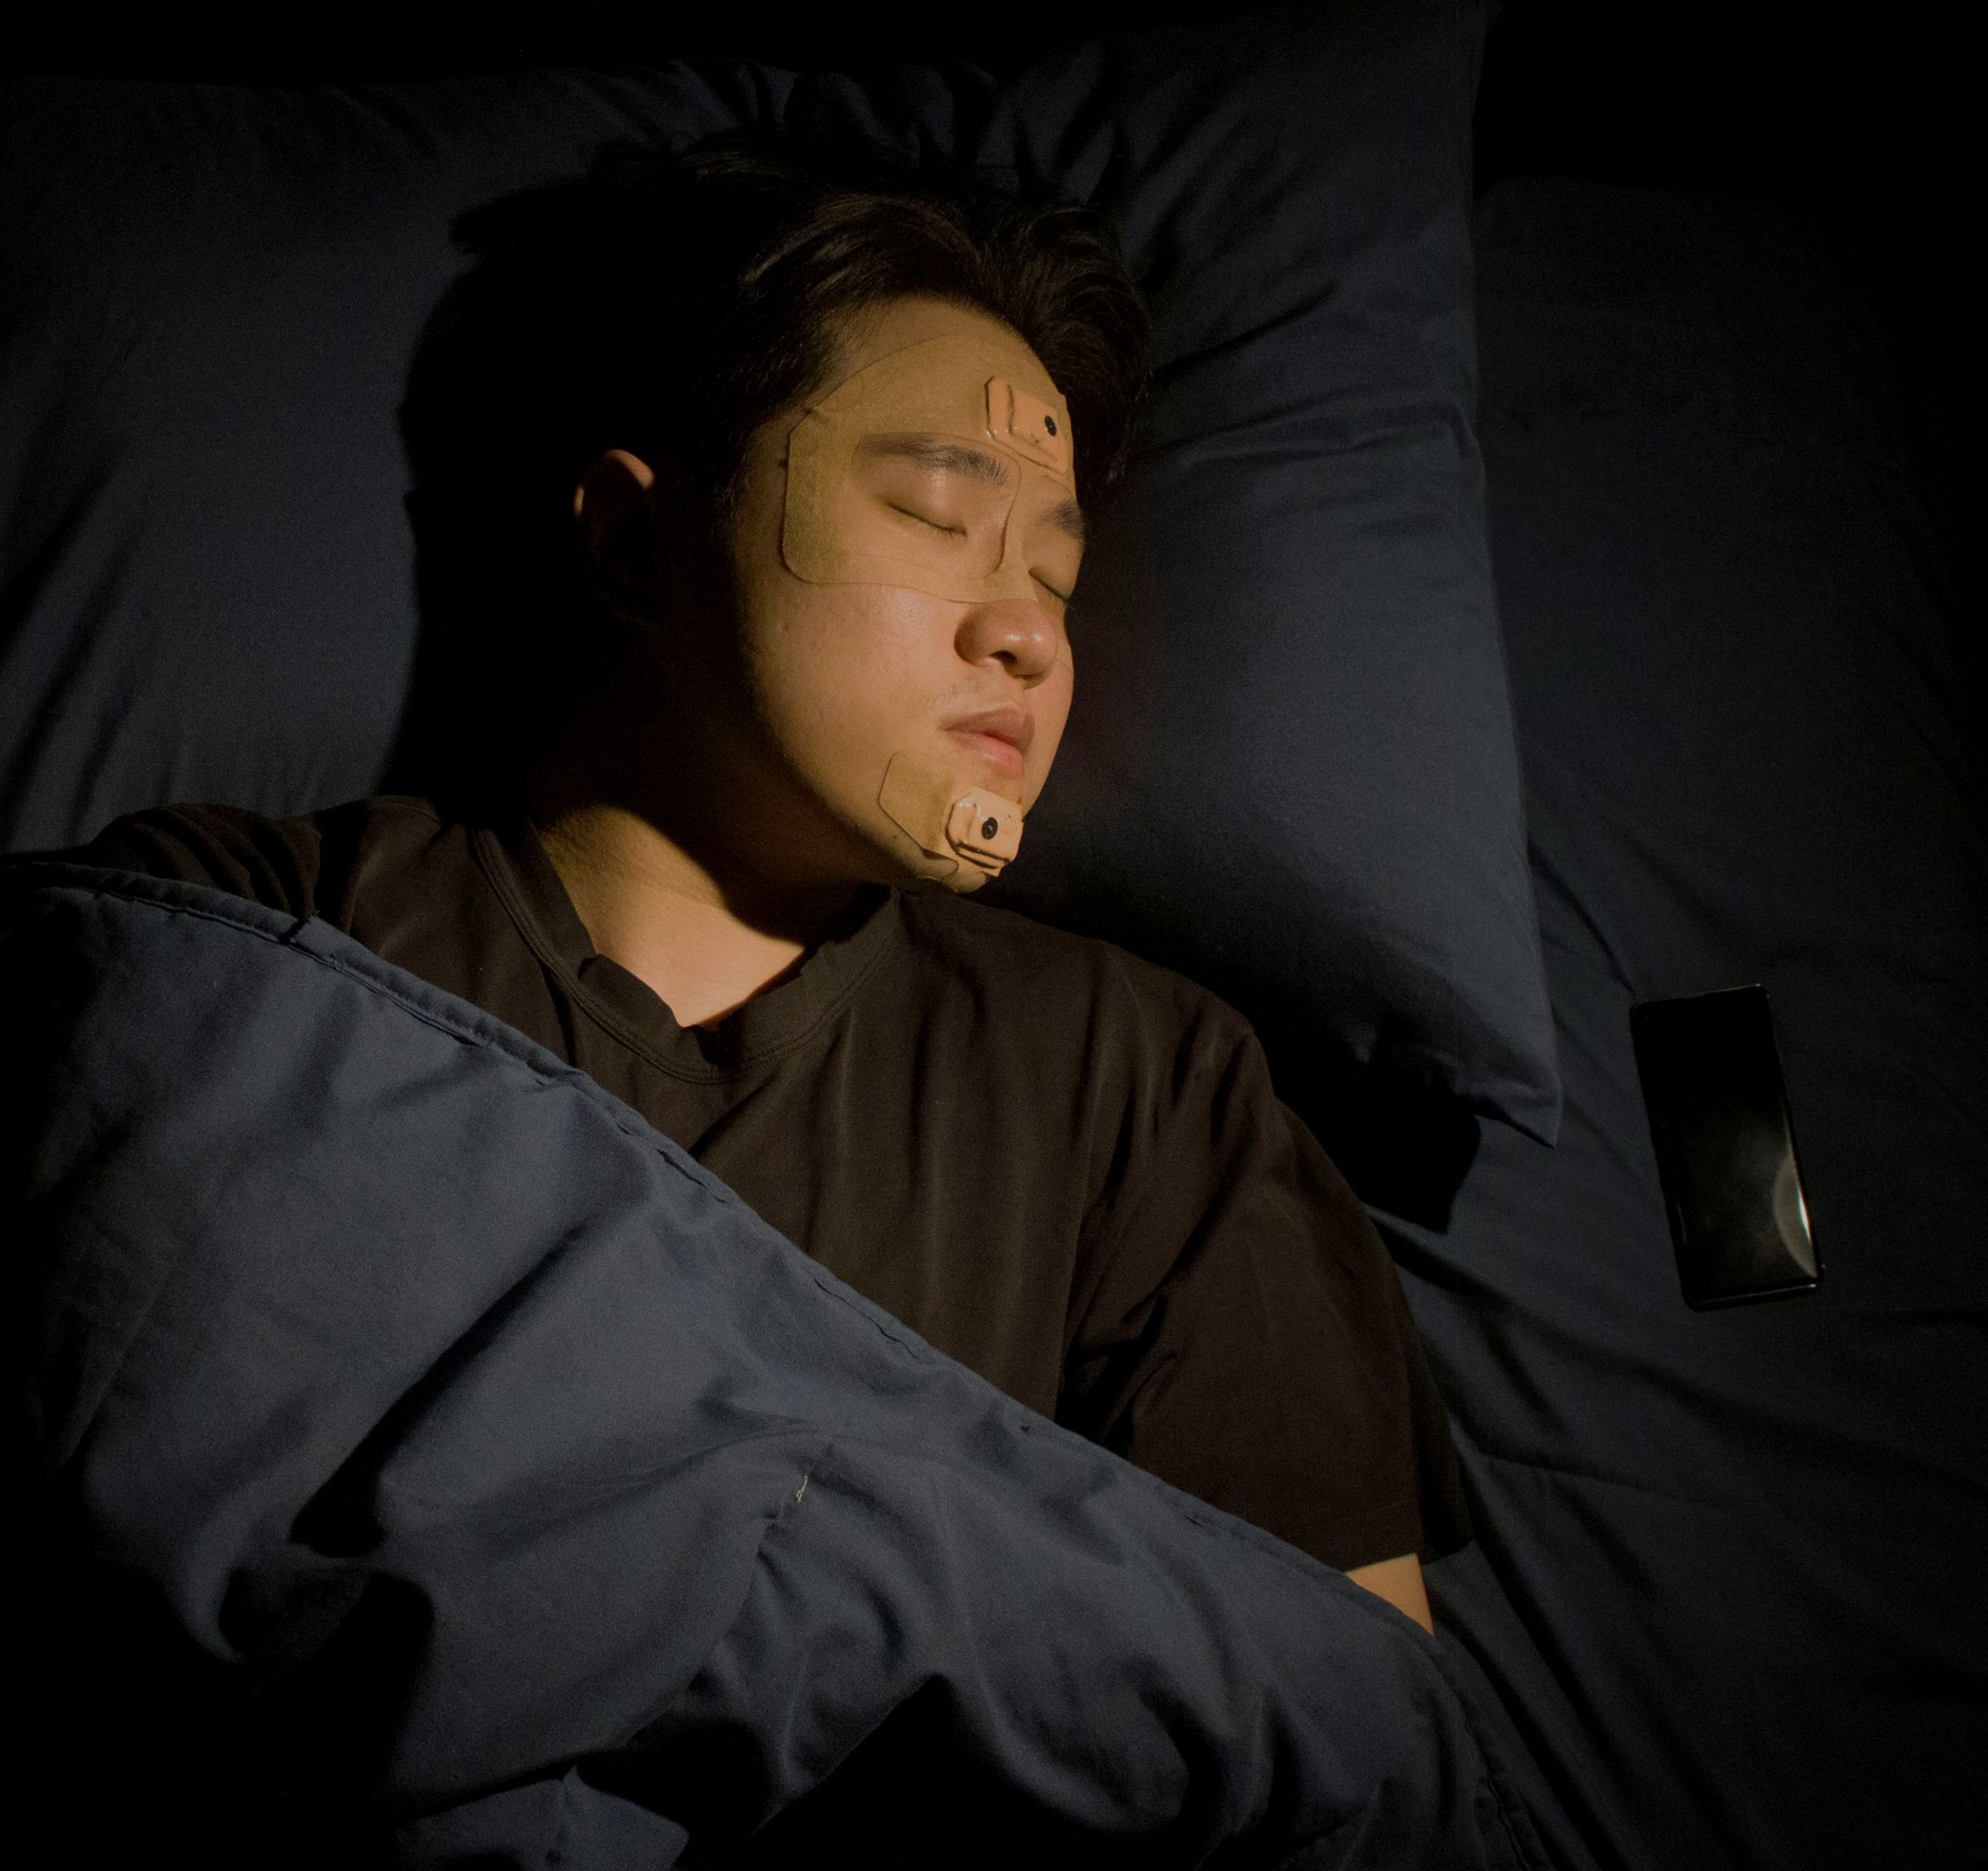  Georgia Tech Associate Professor W. Hong Yeo is shown sleeping with the wearable sleep apnea detection and sleep quality monitoring device he and a team of researchers and clinicians created.  Georgia Tech Associate Professor W. Hong Yeo is shown sleeping with the wearable sleep apnea detection and sleep quality monitoring device he and a team of researchers and clinicians created.